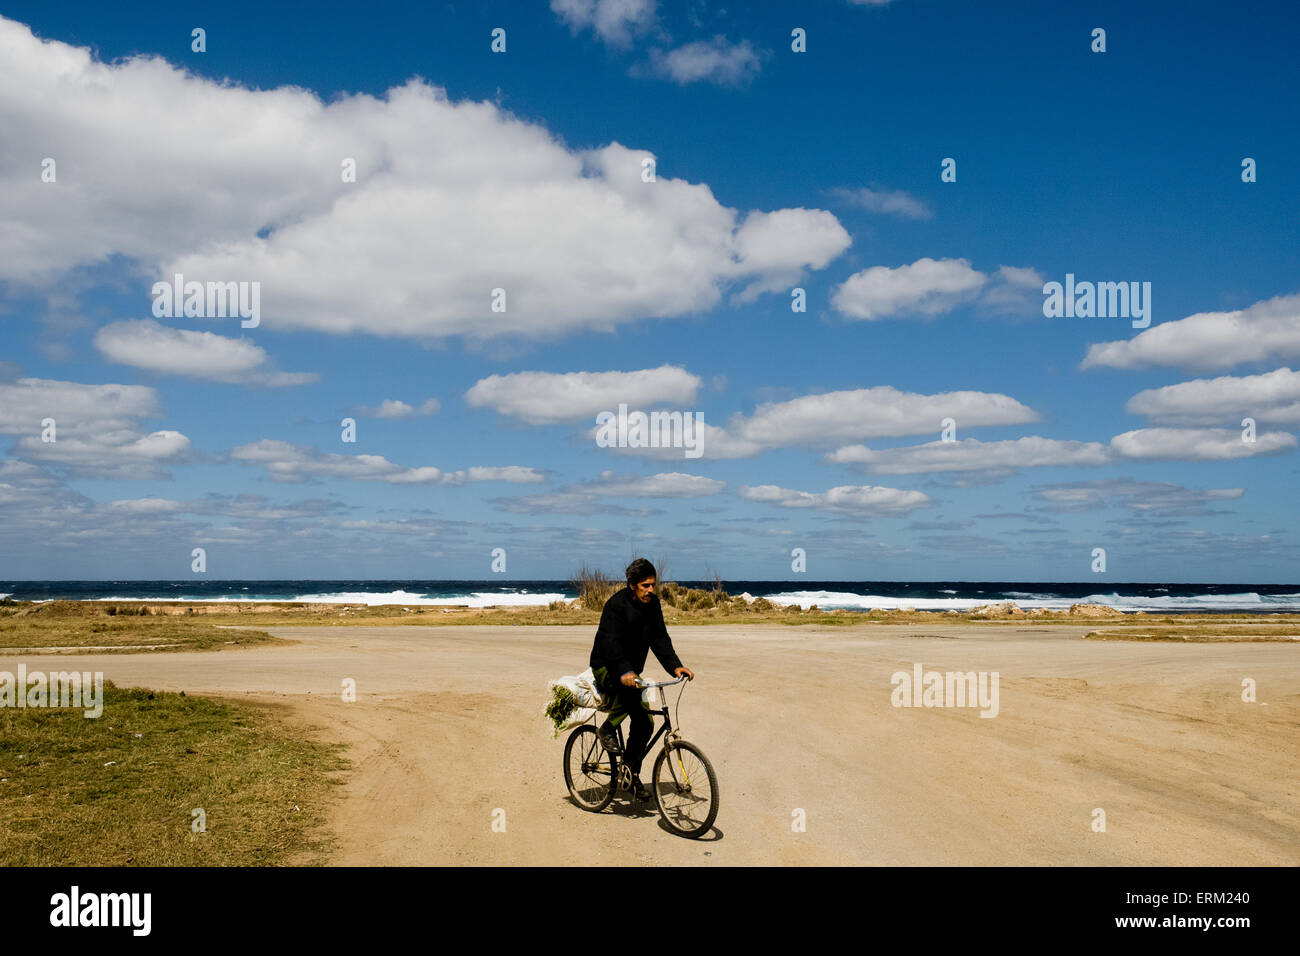 A Cuban man rides a bicycle on the dusty road along the sea in Alamar, Havana, Cuba. Stock Photo